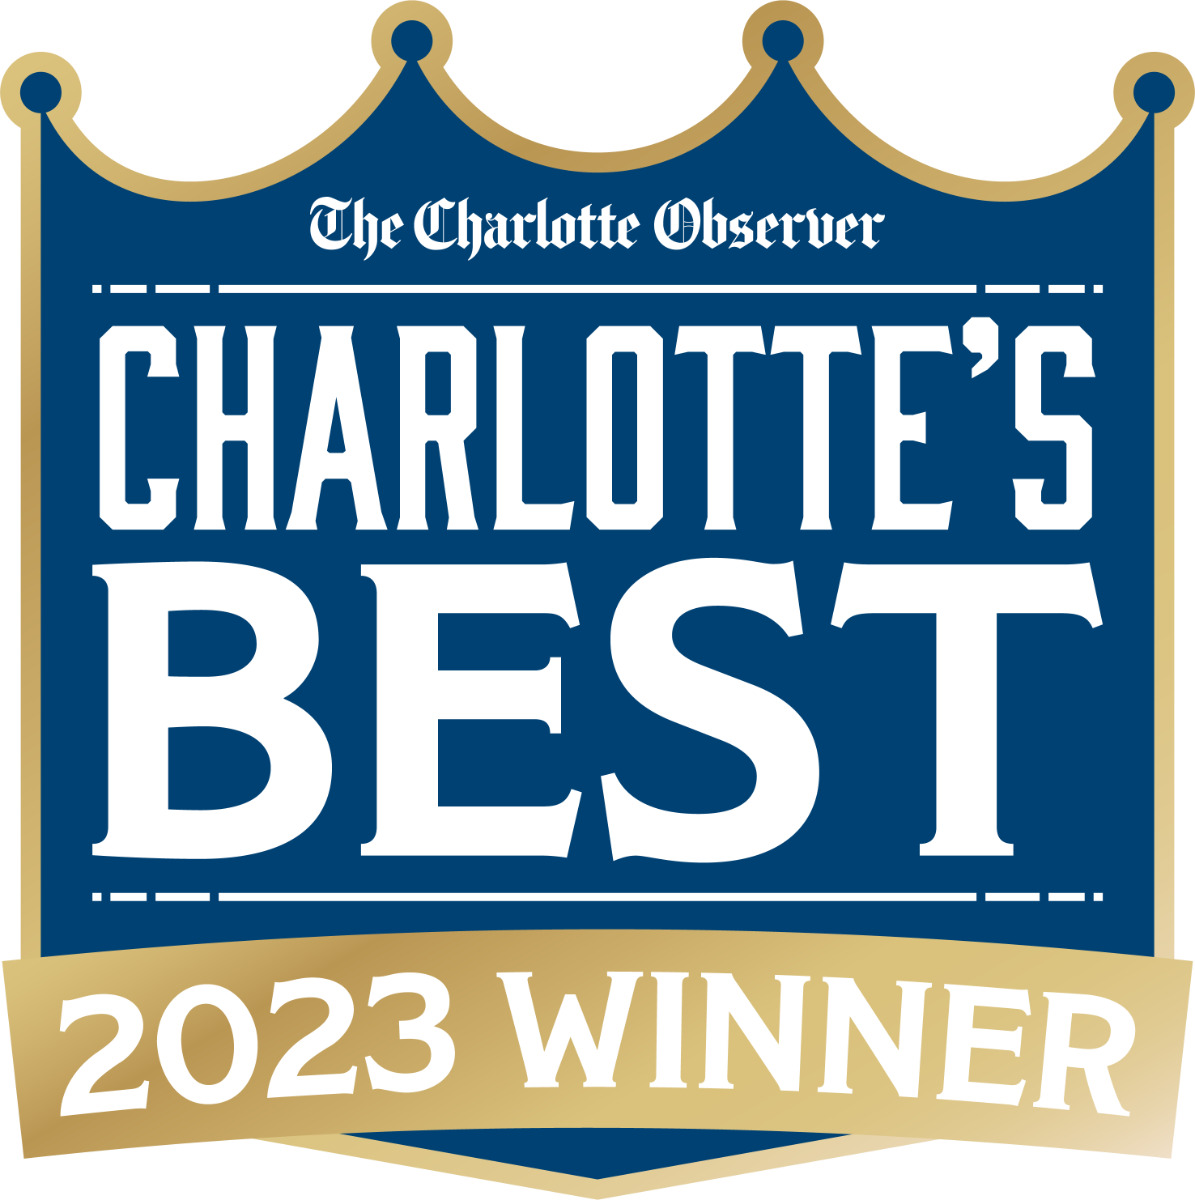 Voted Best in Charlotte